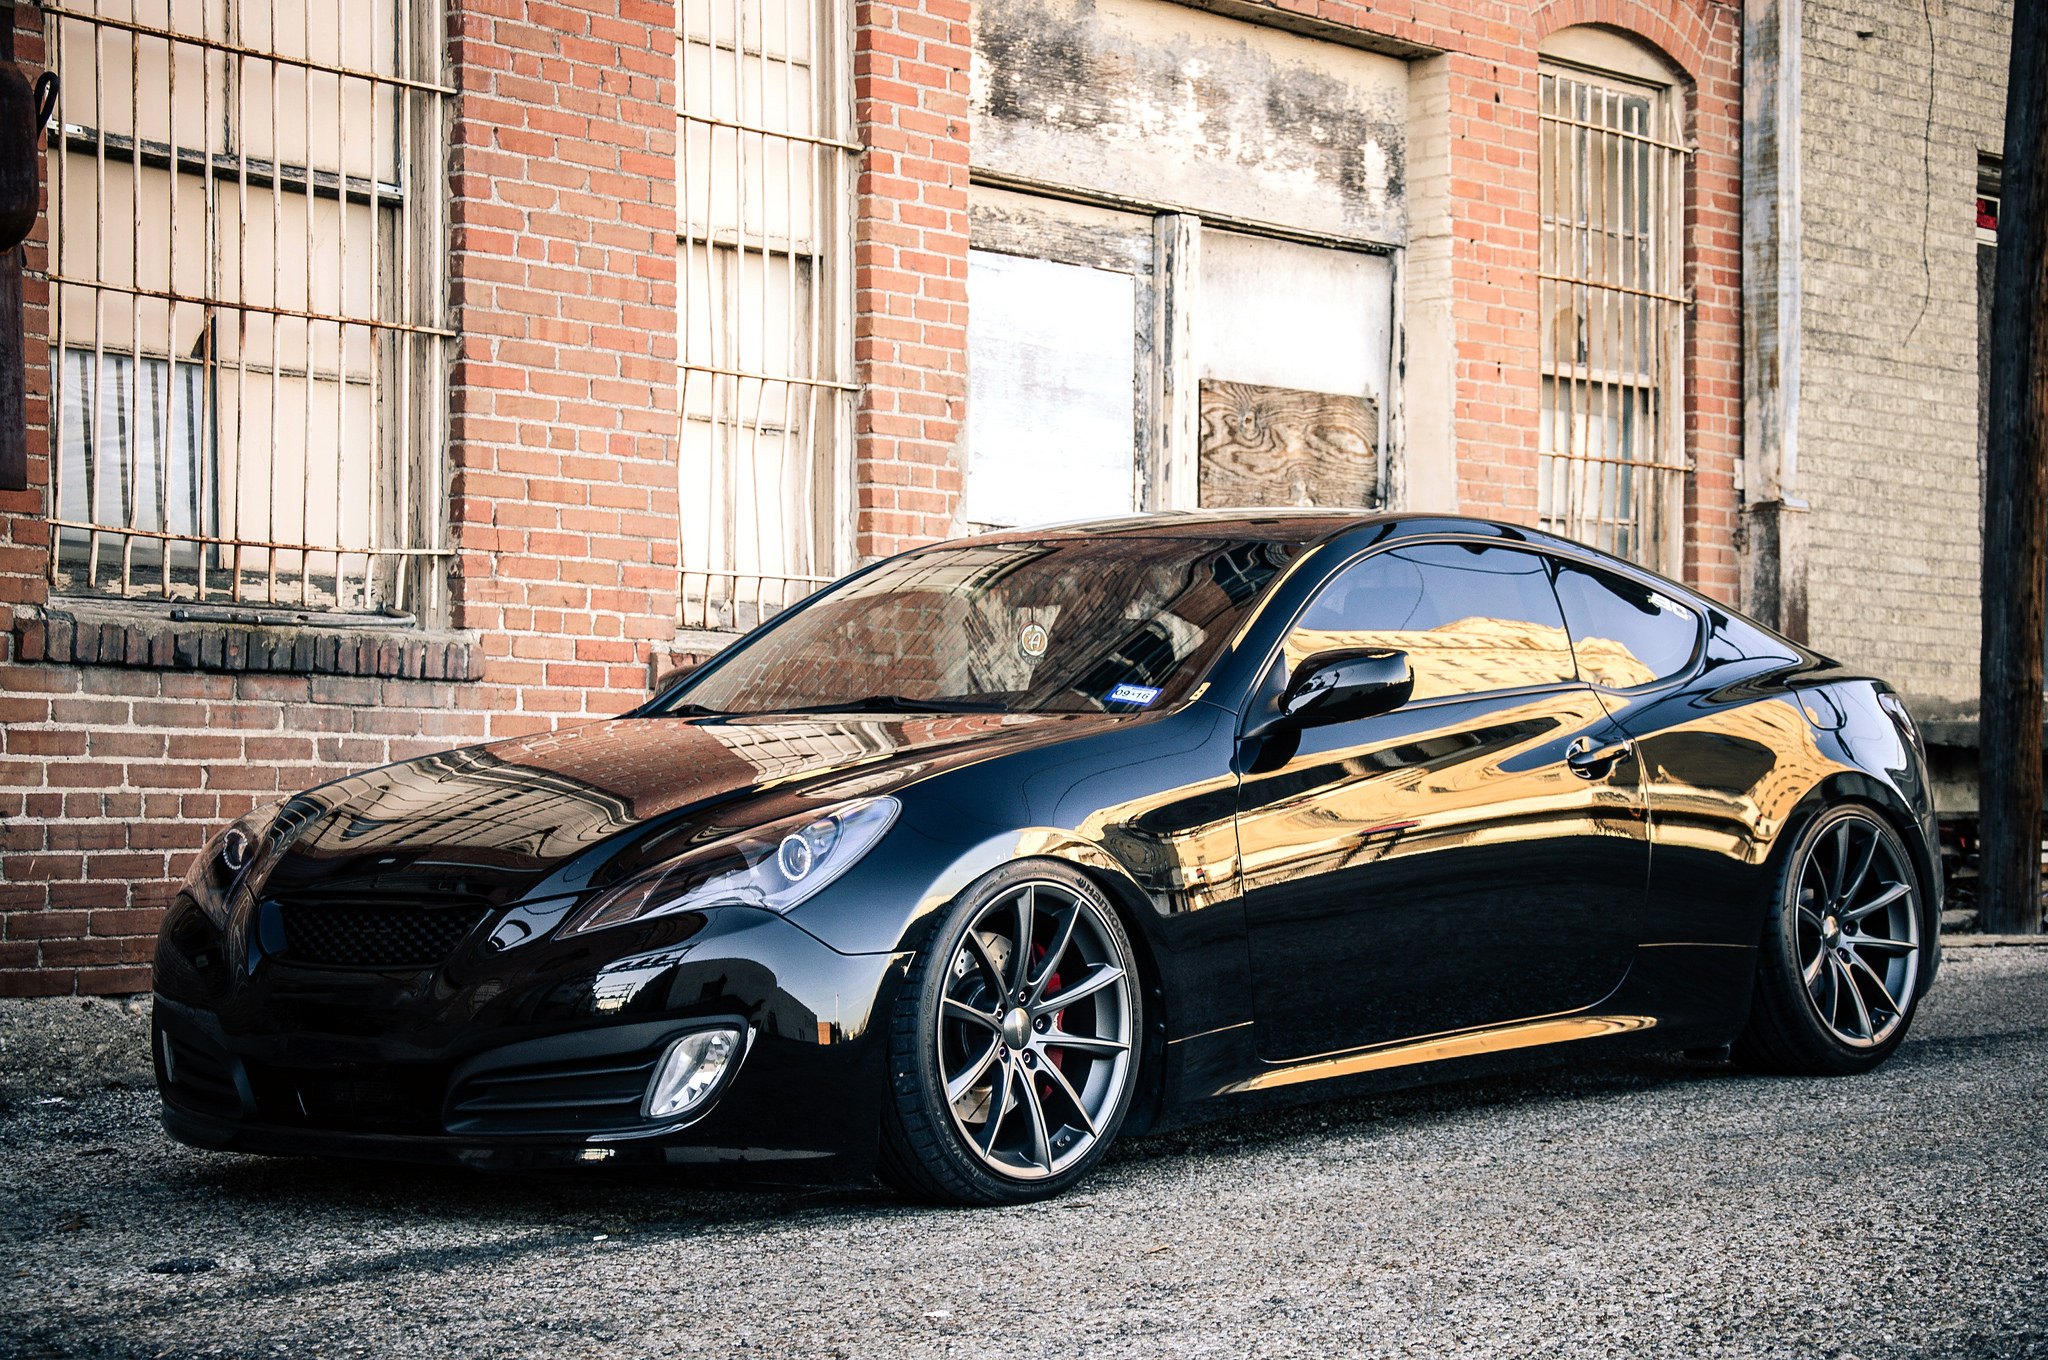 Stanced Hyundai Genesis Coupe on ACE Alloy Wheels - Photo by ACE Alloy